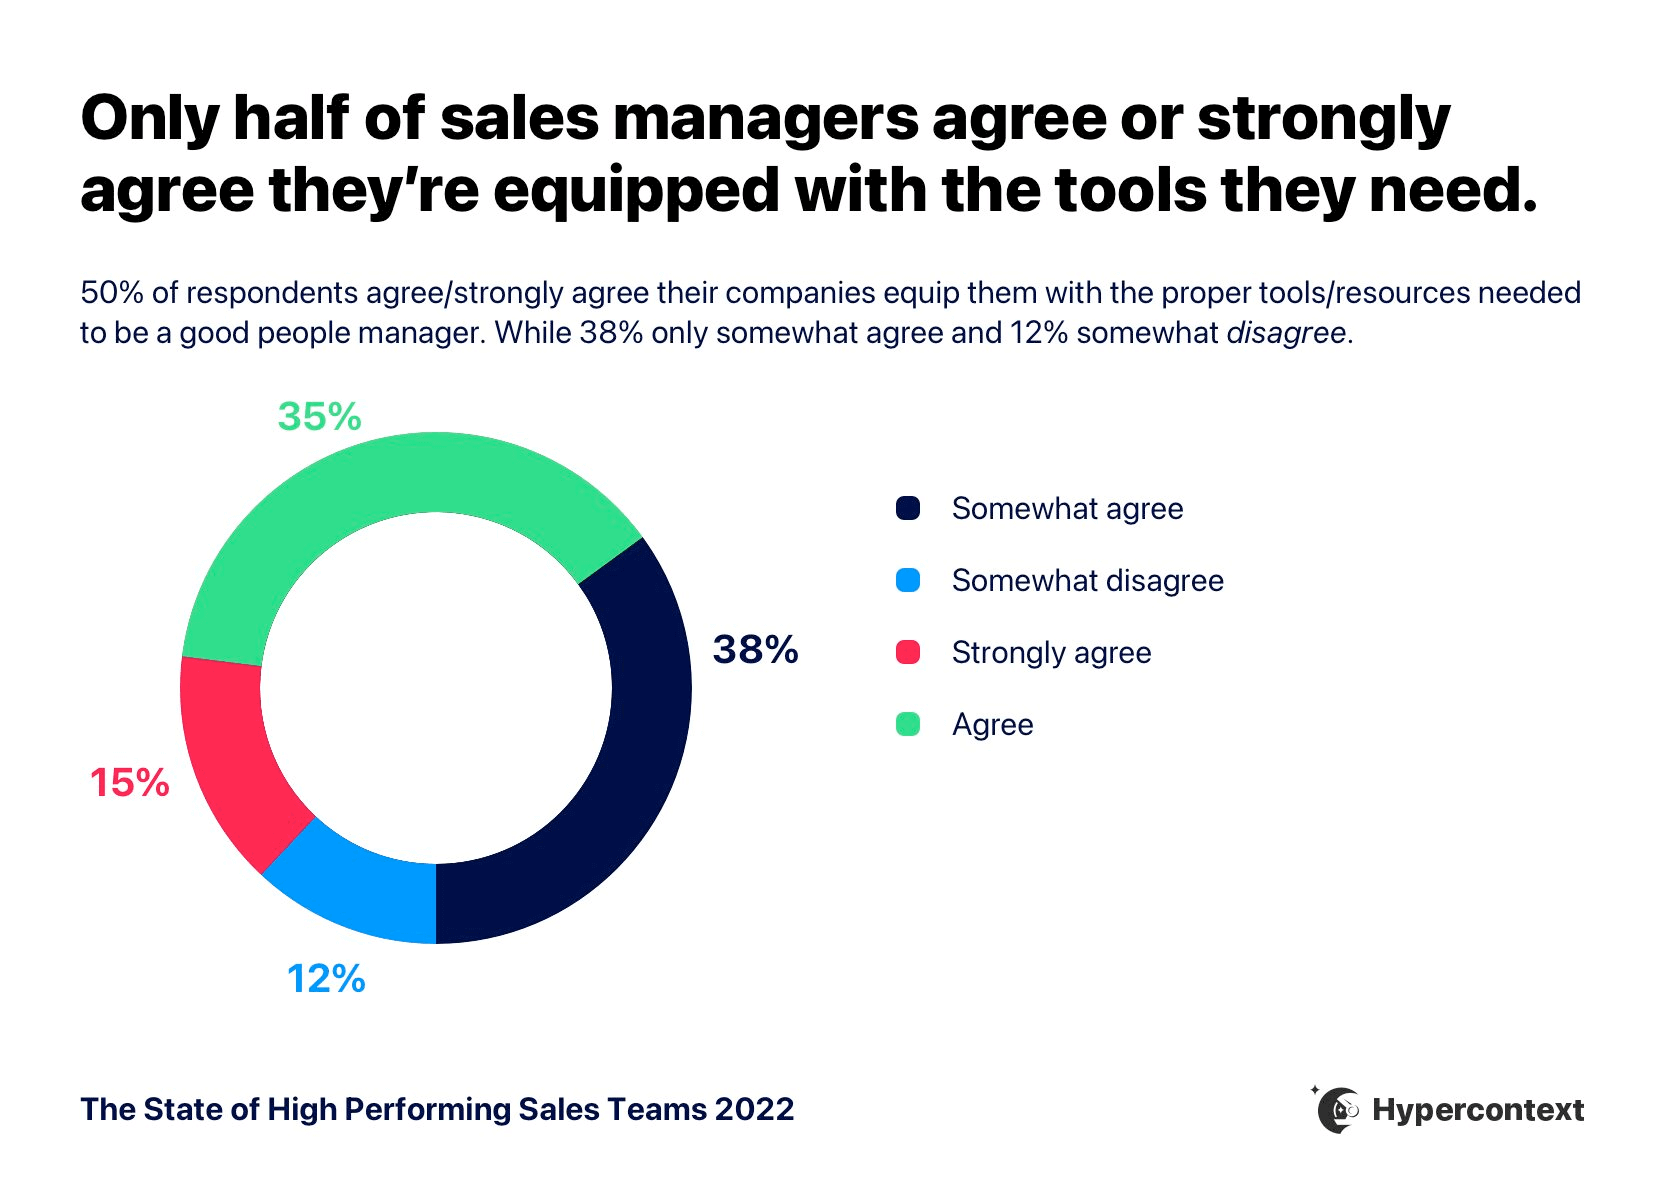 Only half of sales managers agree or strongly agree they're equipped with the tools they need